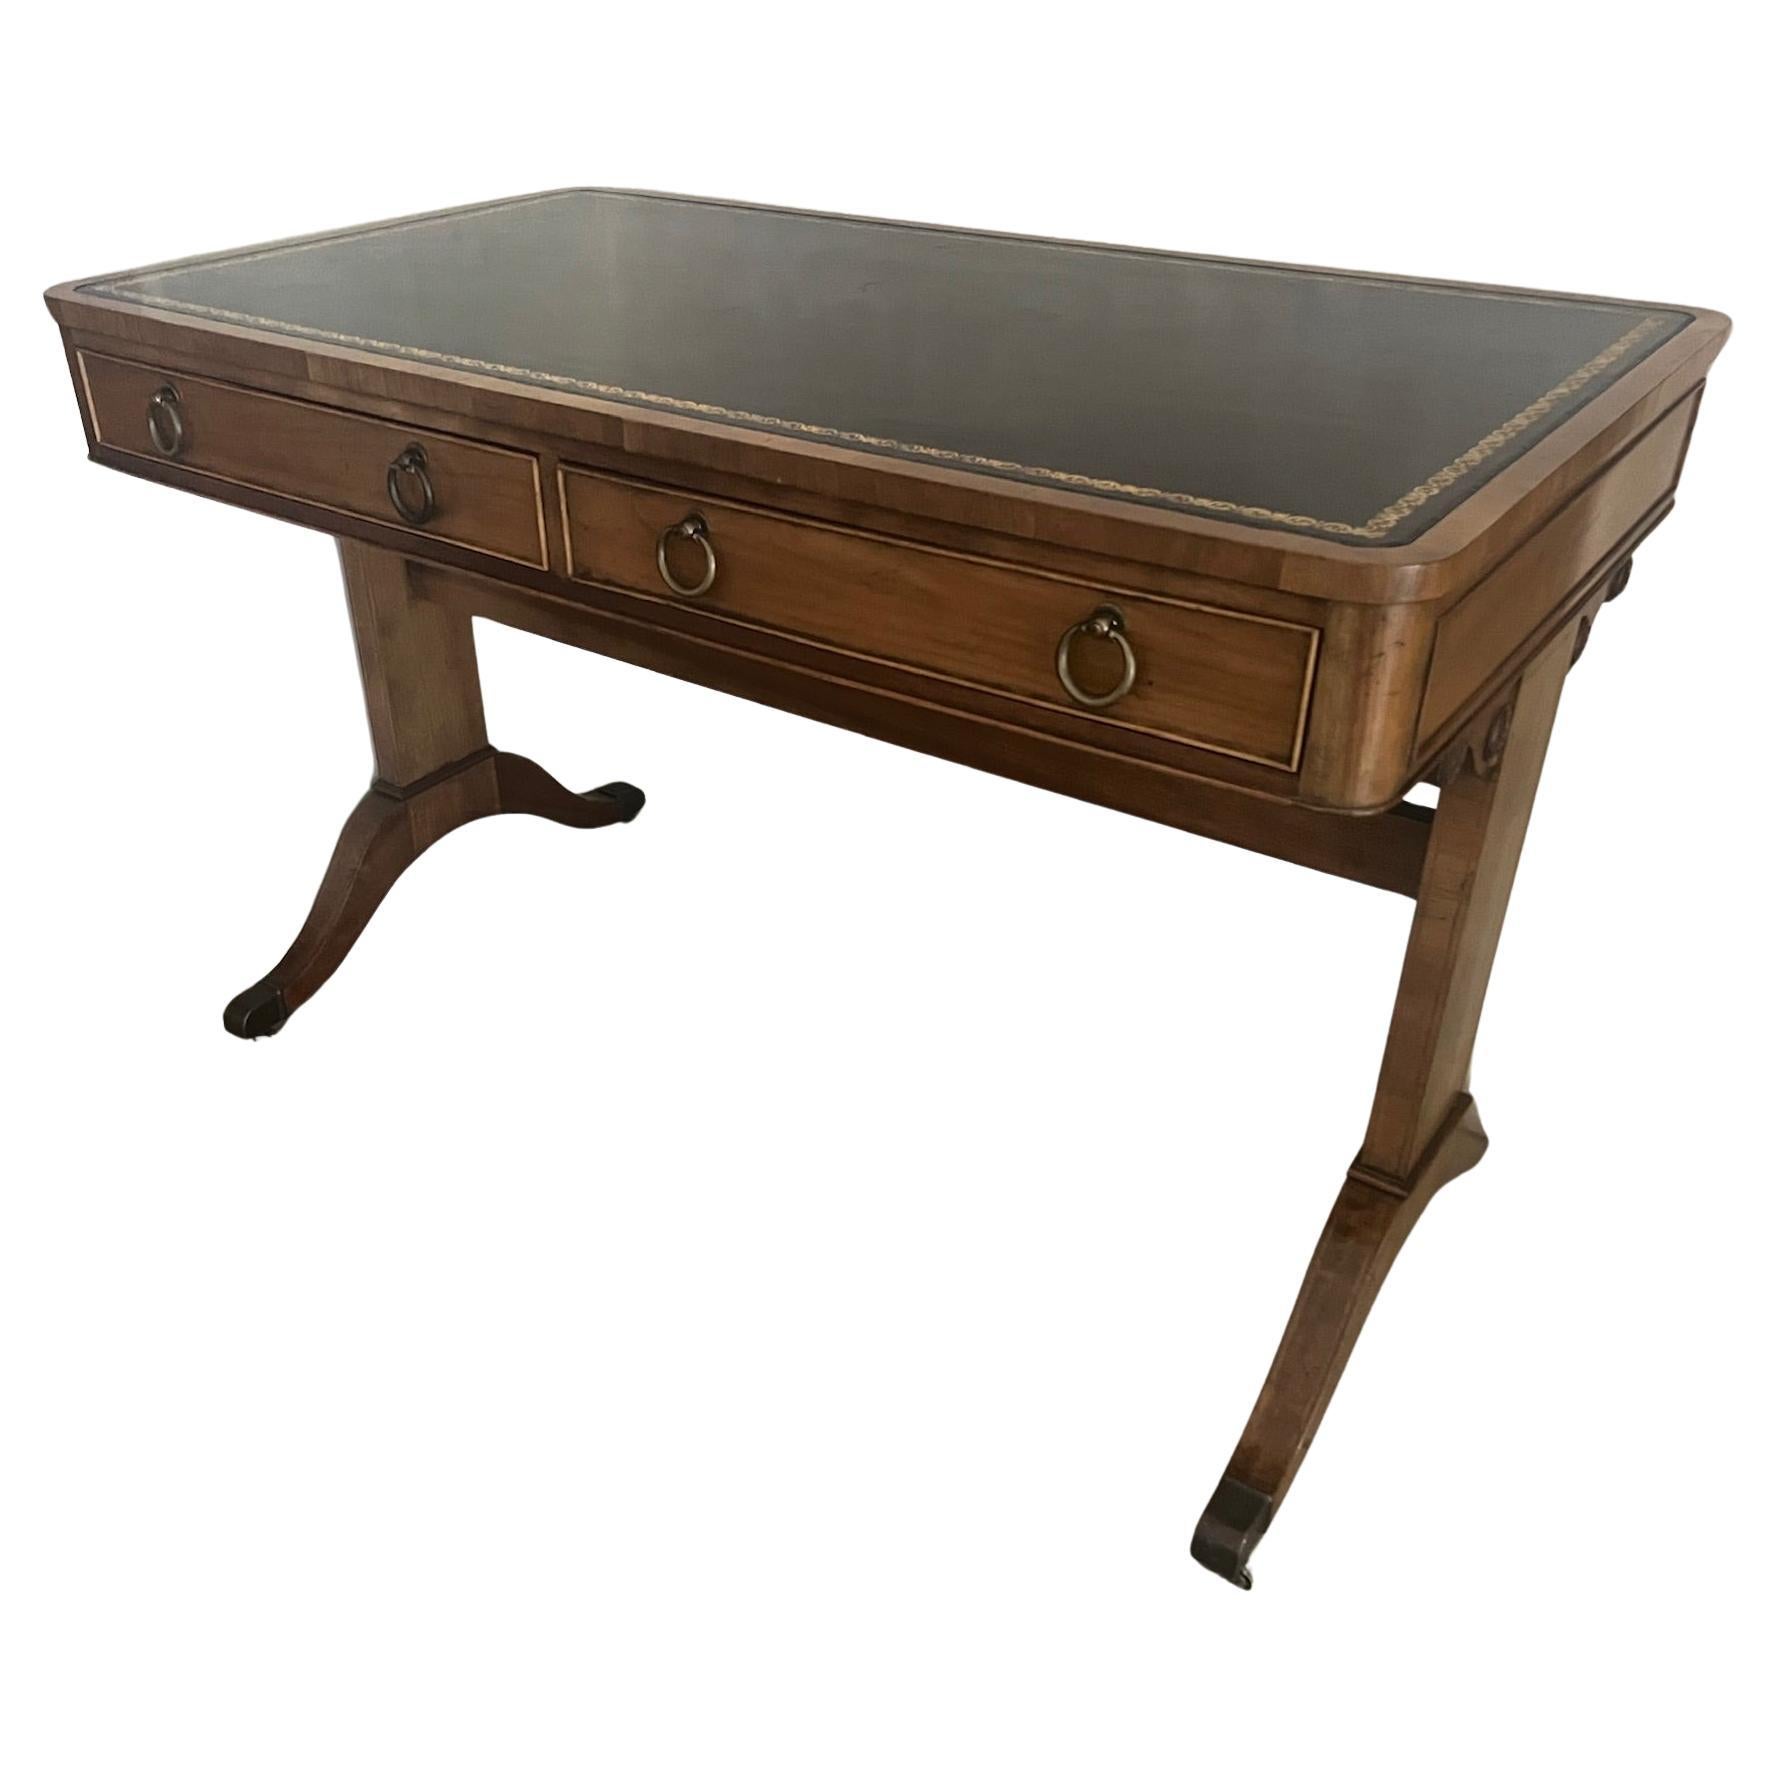 Baker Furniture Company writing table or desk. The table has Regency style details, including carved circles on the side and a black tooled leather top. The feet have brass covers and wheels.
All my furniture can be picked up for free, I am in the